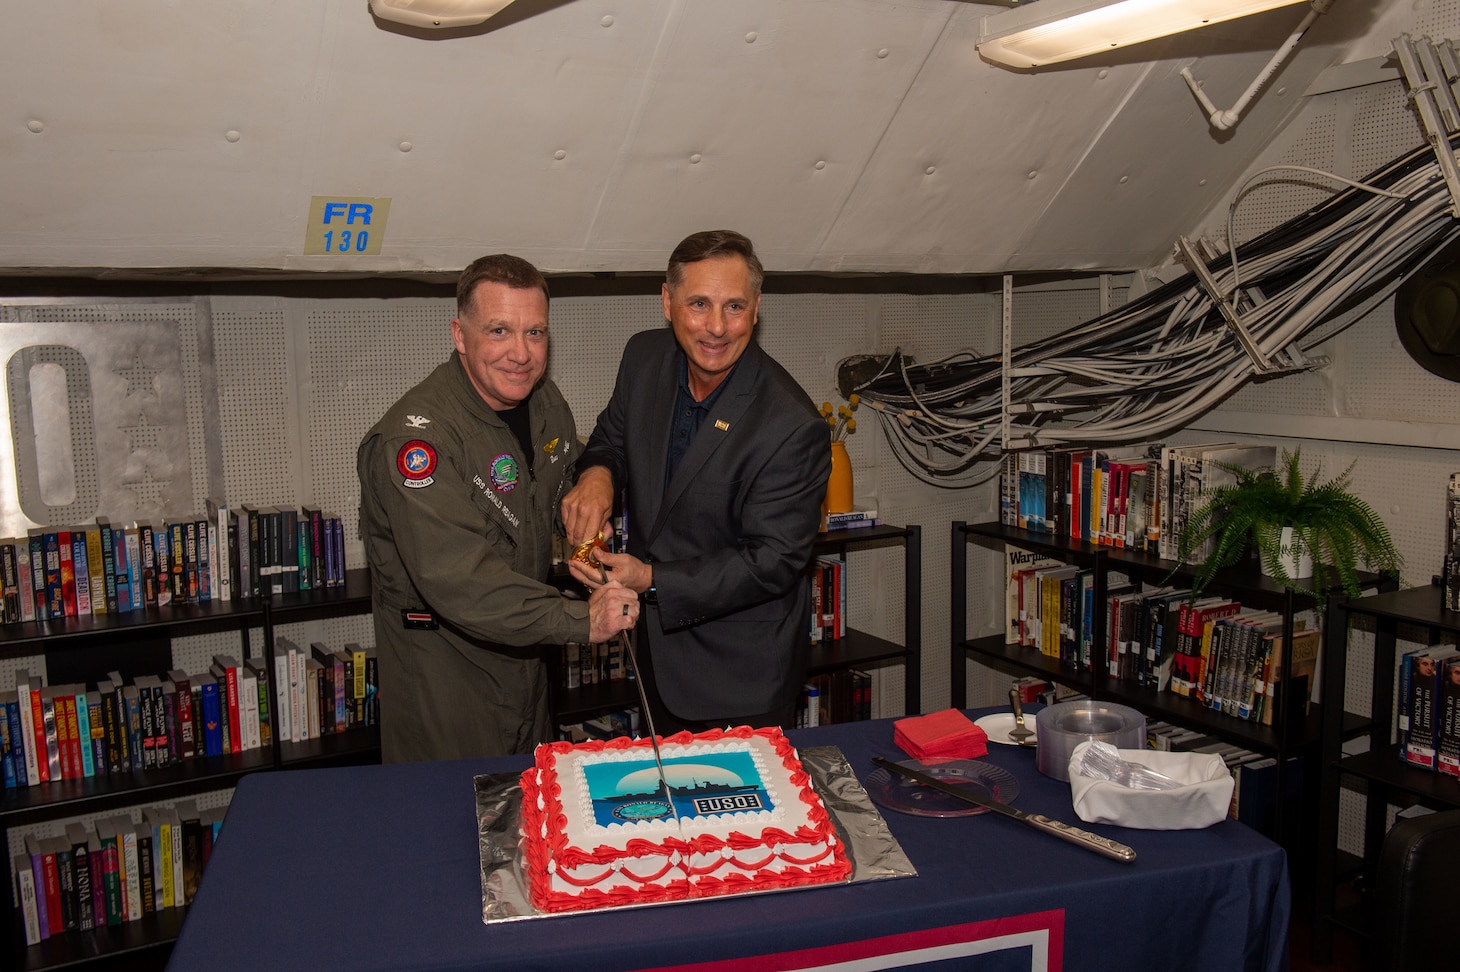 Capt. Daryle Cardone, commanding officer of the U.S. Navy’s only forward-deployed aircraft carrier, USS Ronald Reagan (CVN 76), and Scott Maskery, regional vice president for the United Service Operations (USO) Indo-Pacific regional office, cut a cake during the opening of a ship-based USO center aboard the ship while in-port Commander, Fleet Activities Yokosuka, April 17. Ronald Reagan, the flagship of Carrier Strike Group 5, provides a combat-ready force that protects and defends the United States, and supports alliances, partnerships and collective maritime interests in the Indo-Pacific region.